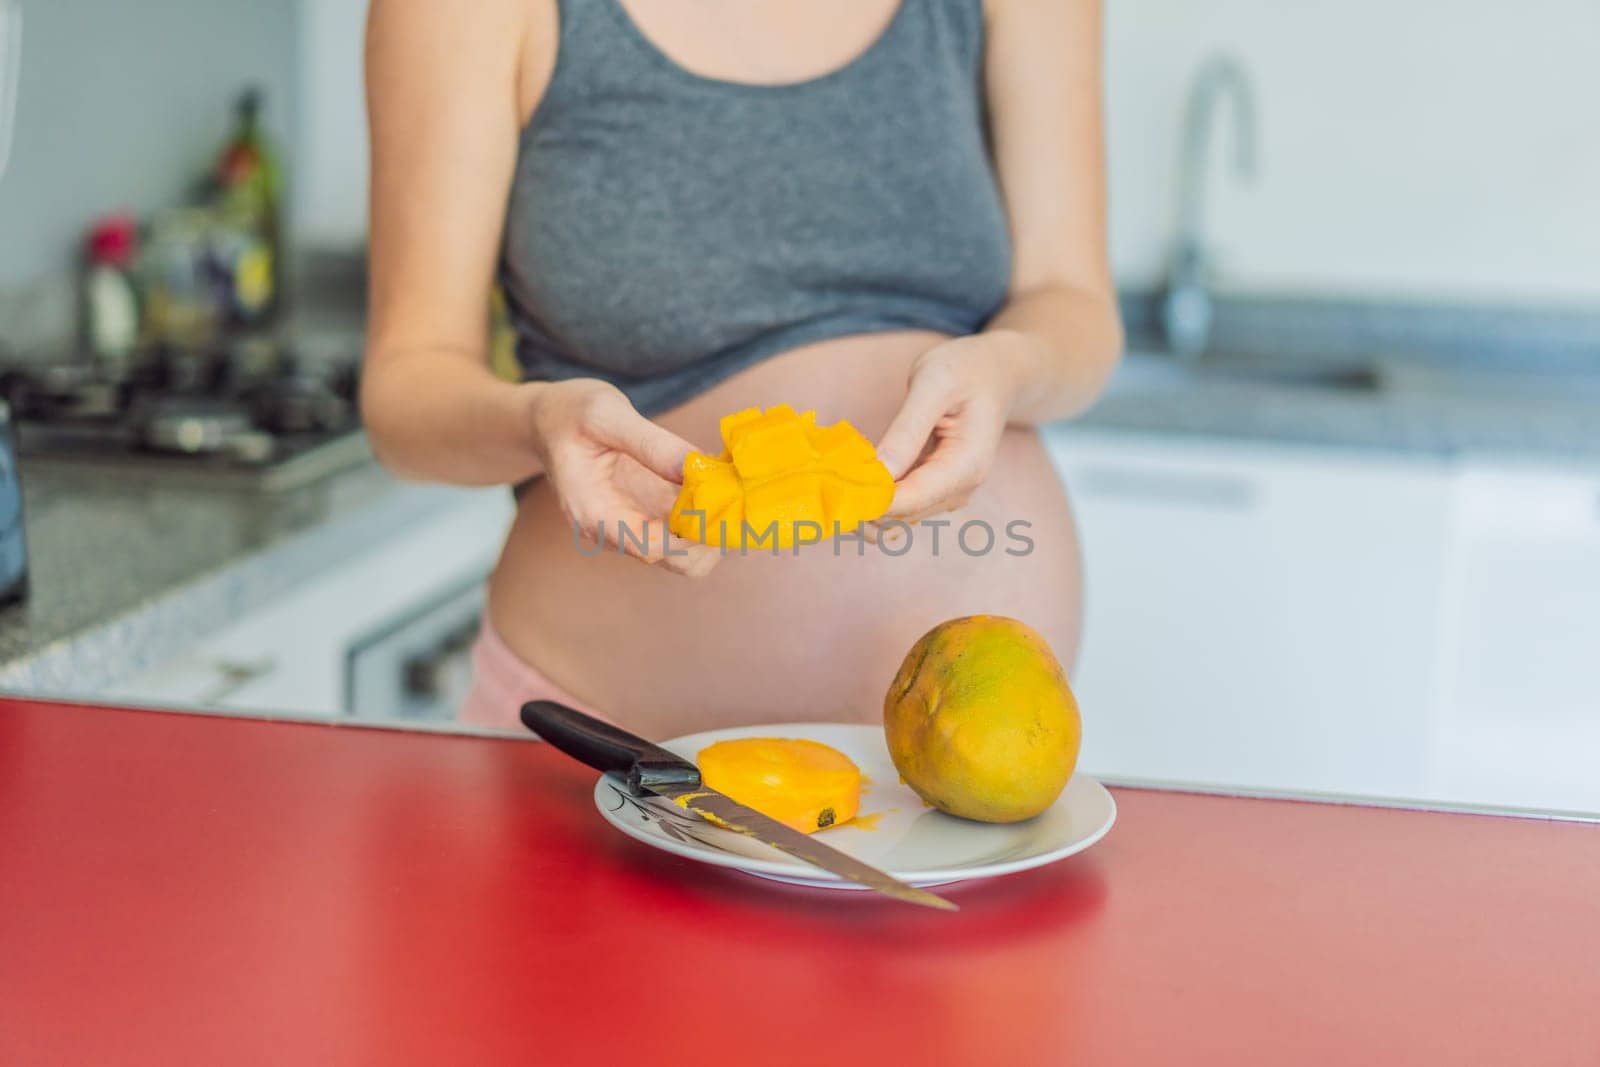 A skillful pregnant woman delicately cuts into a ripe mango, savoring a moment of culinary joy and nourishing her pregnancy with a fresh and flavorful treat by galitskaya